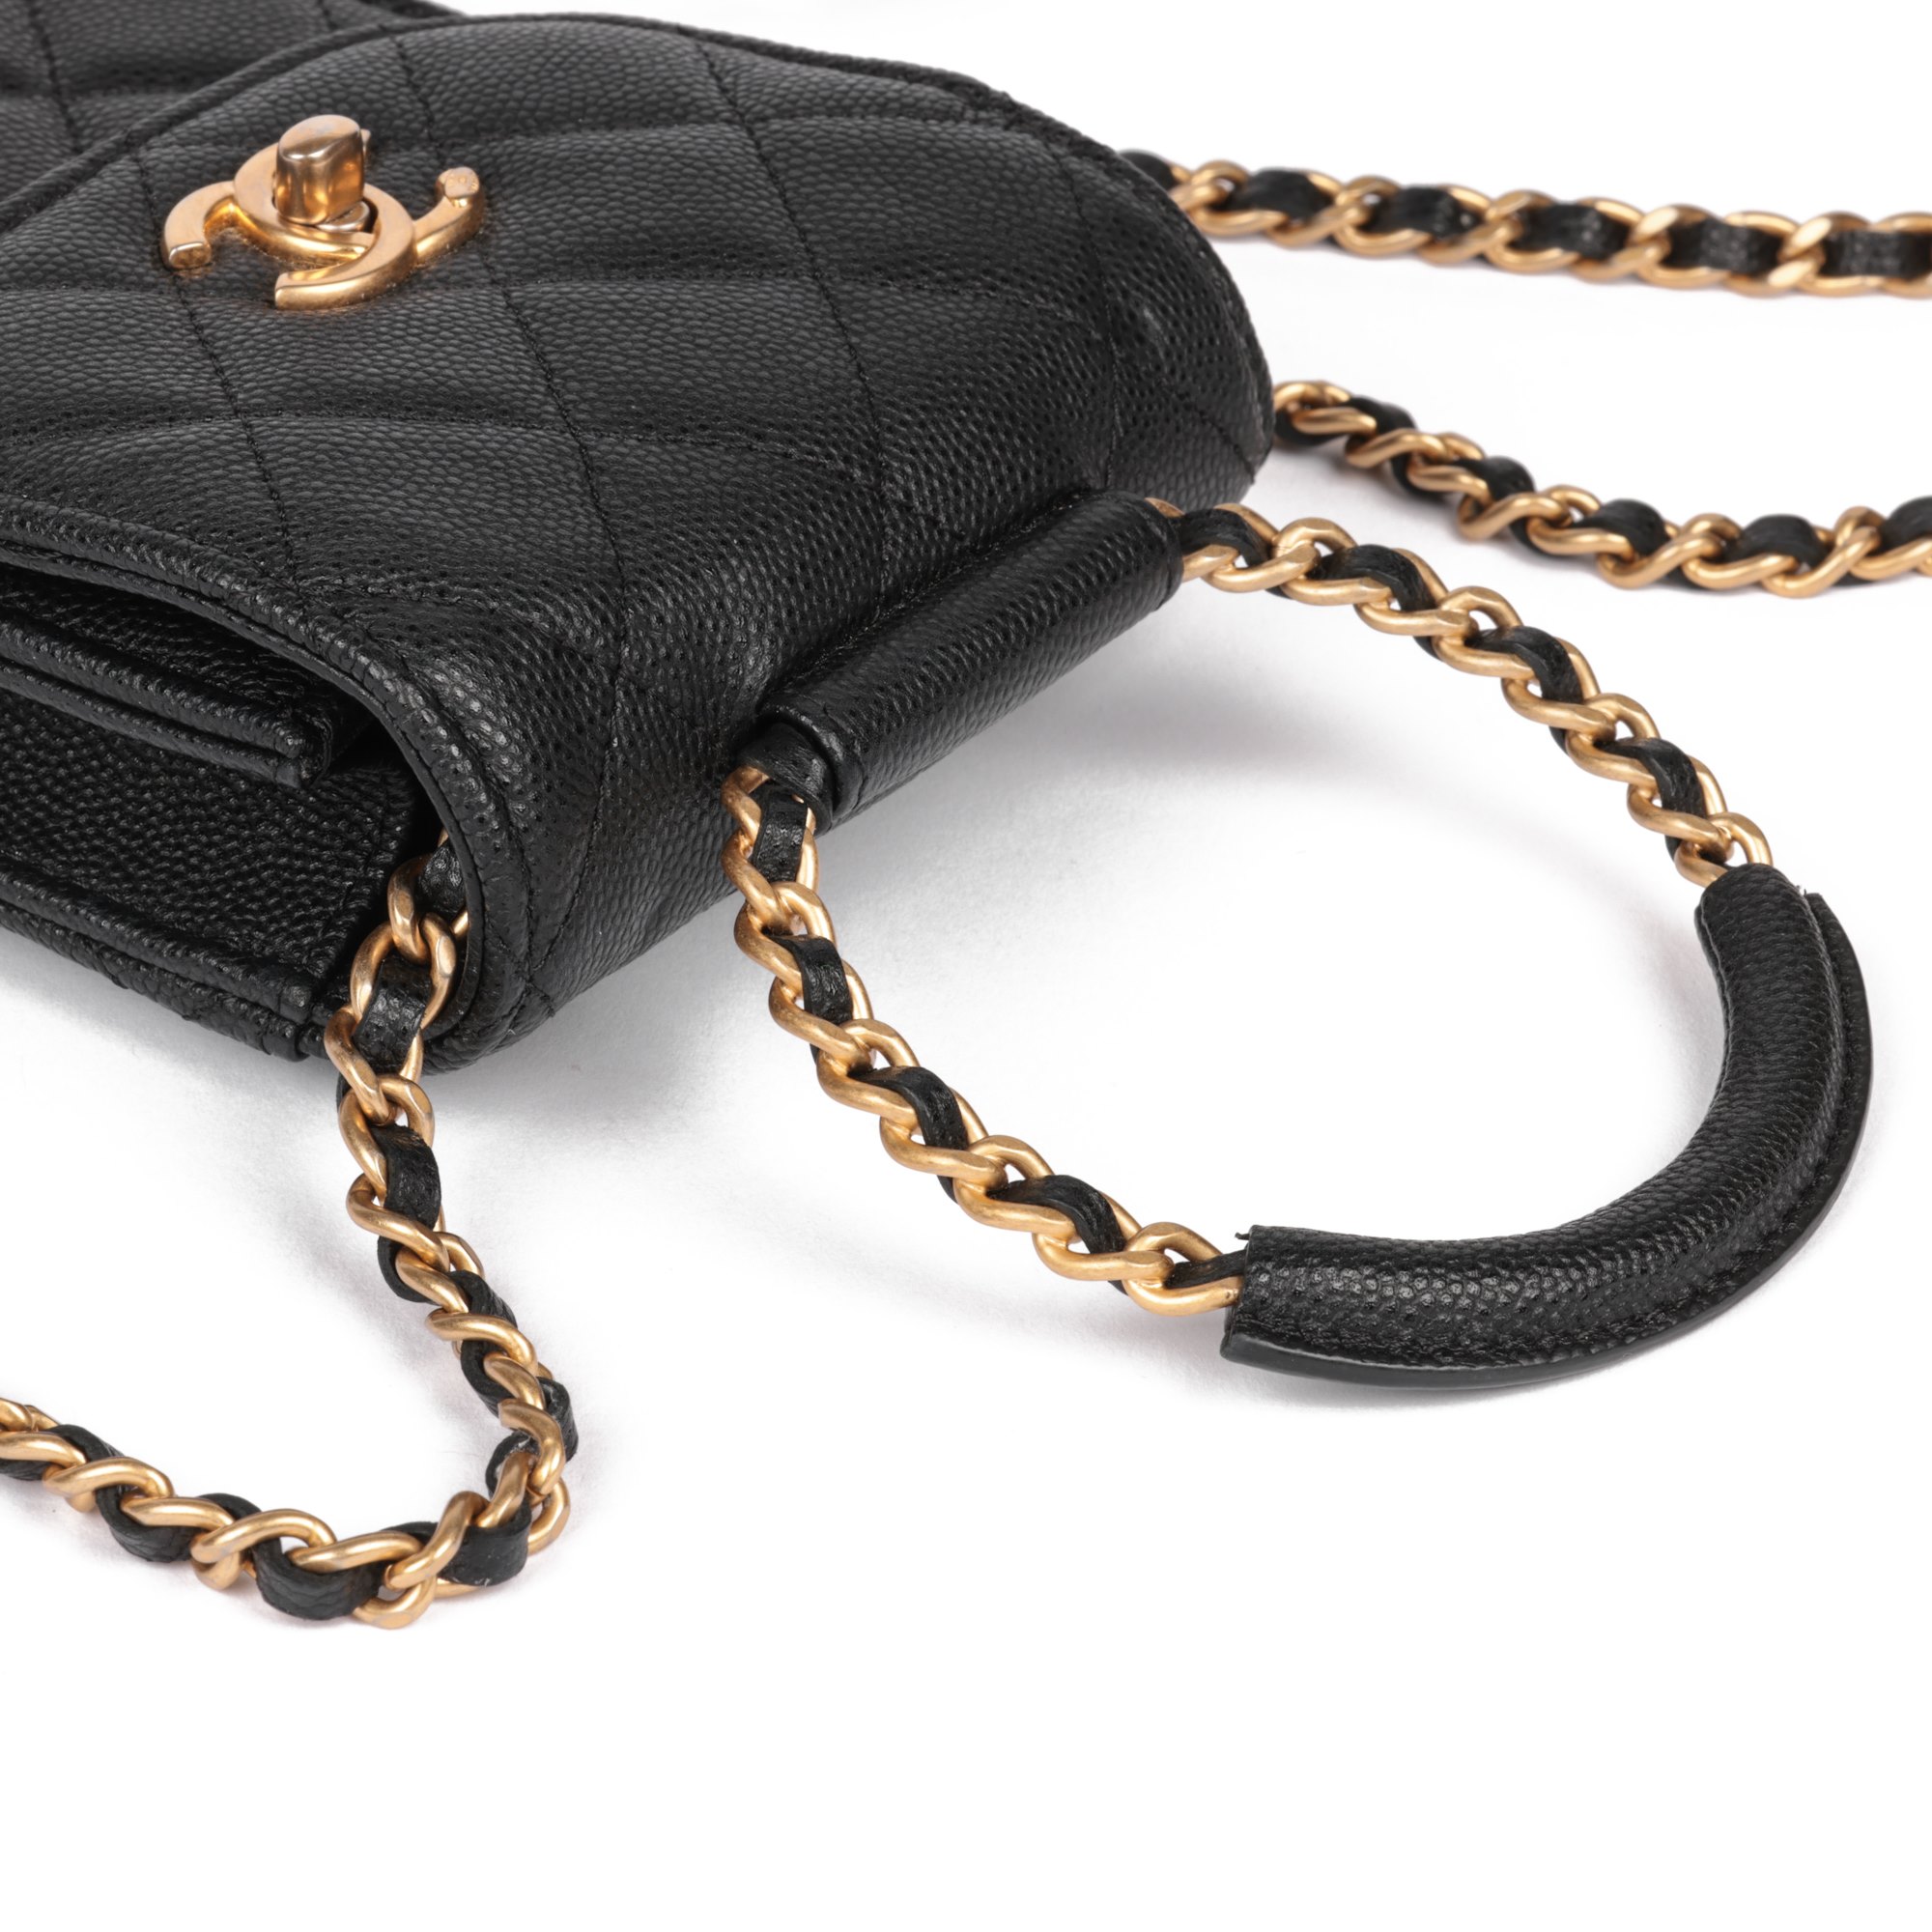 Chanel Black Quilted Caviar Leather In The Loop Phone Holder-with-Chain